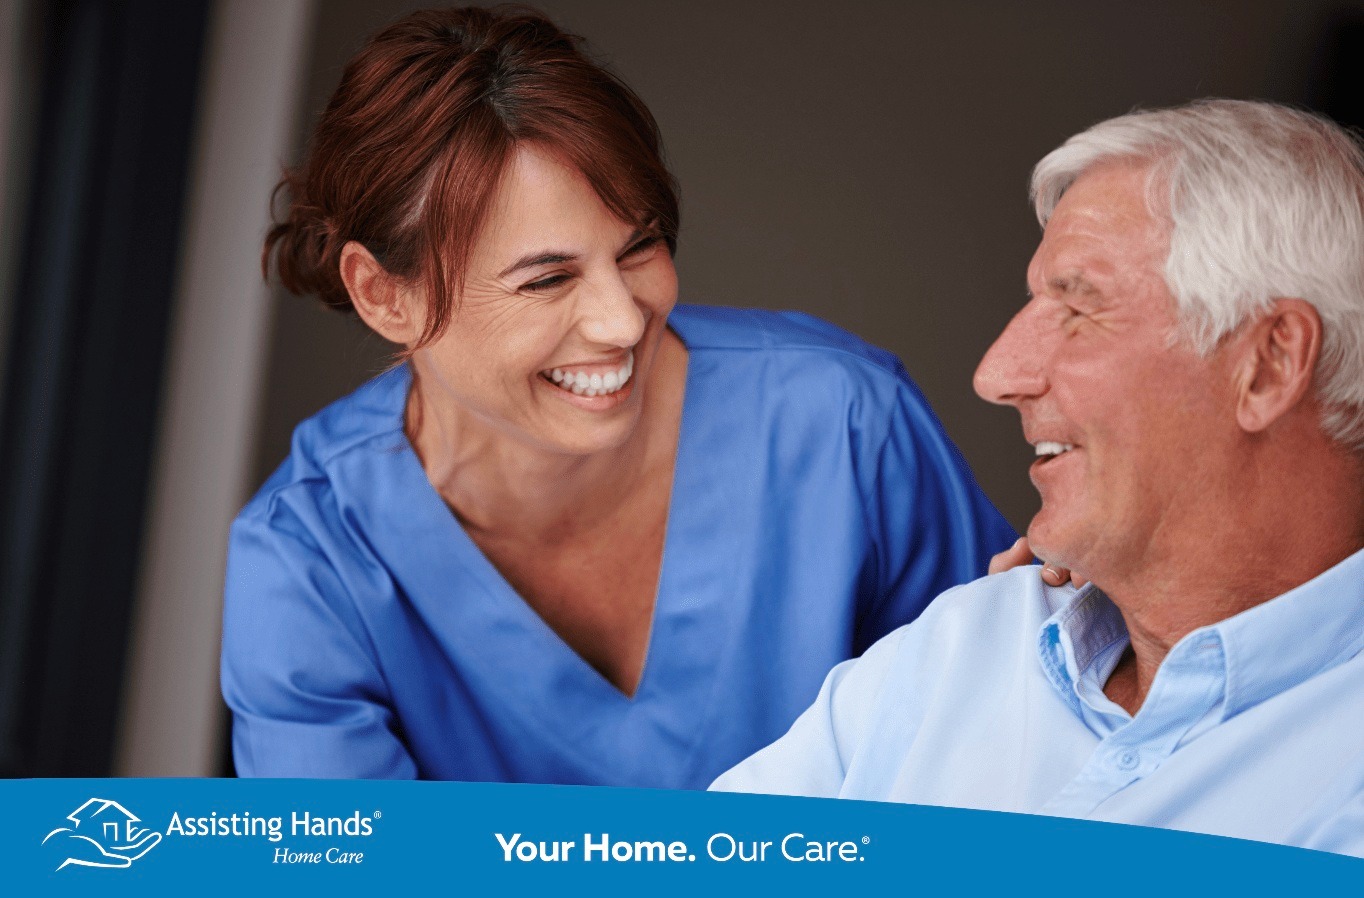 compassionate care by Assisting Hands Home Care